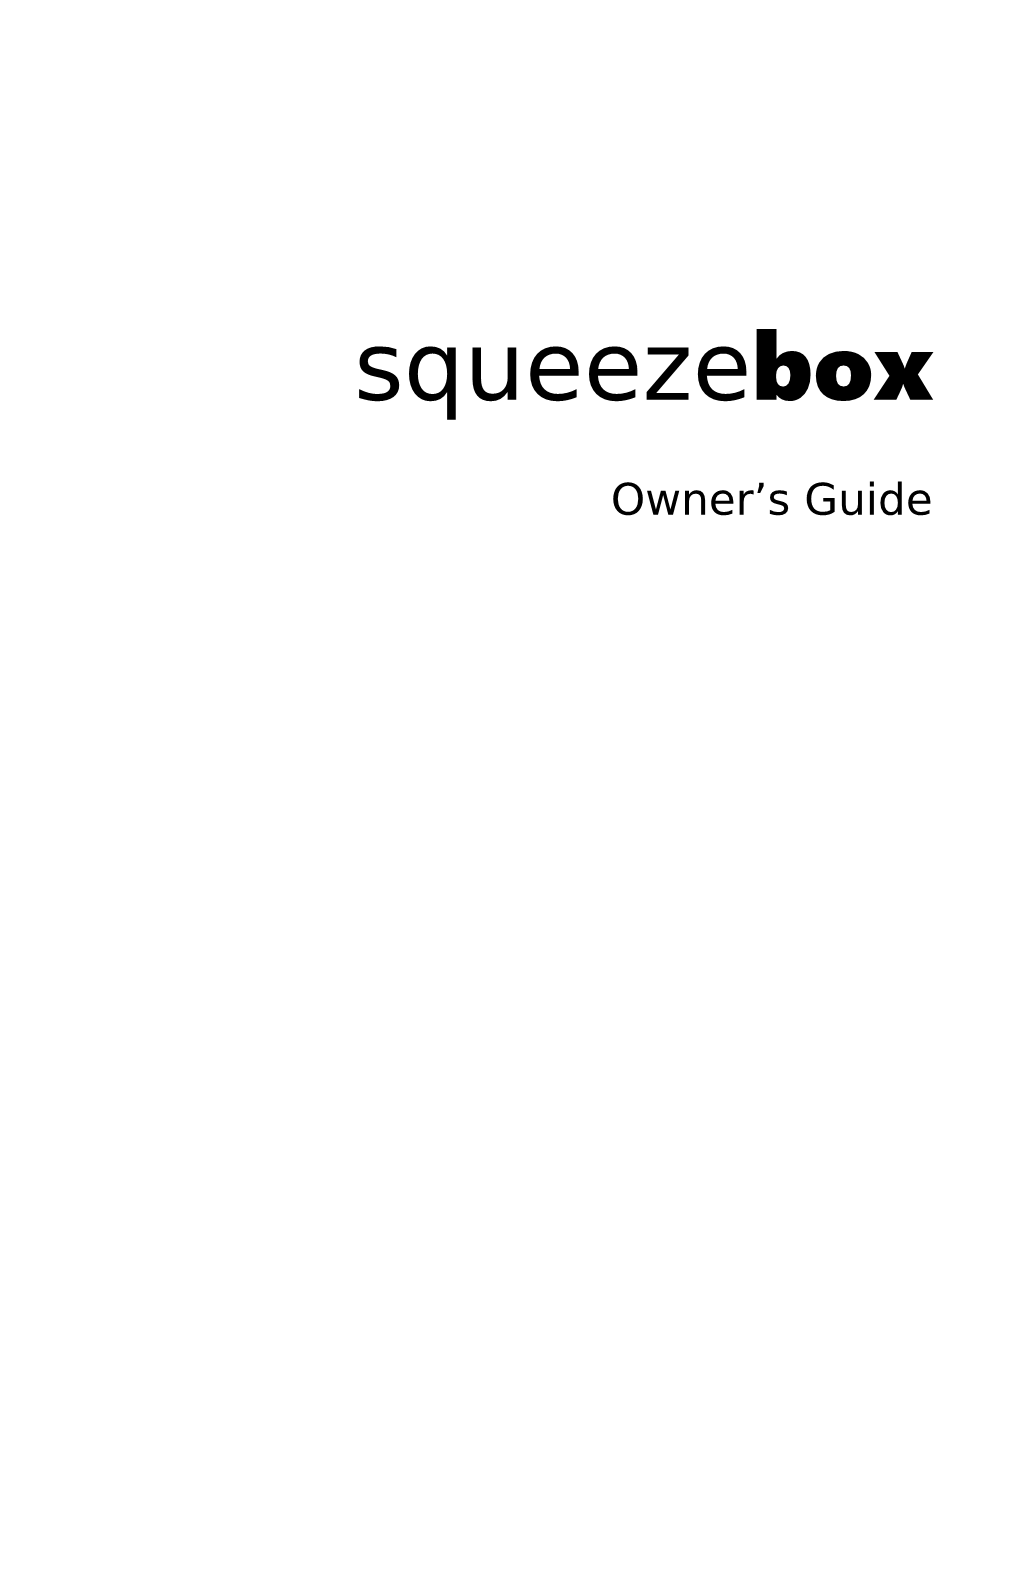 Squeezebox Owner's Guide